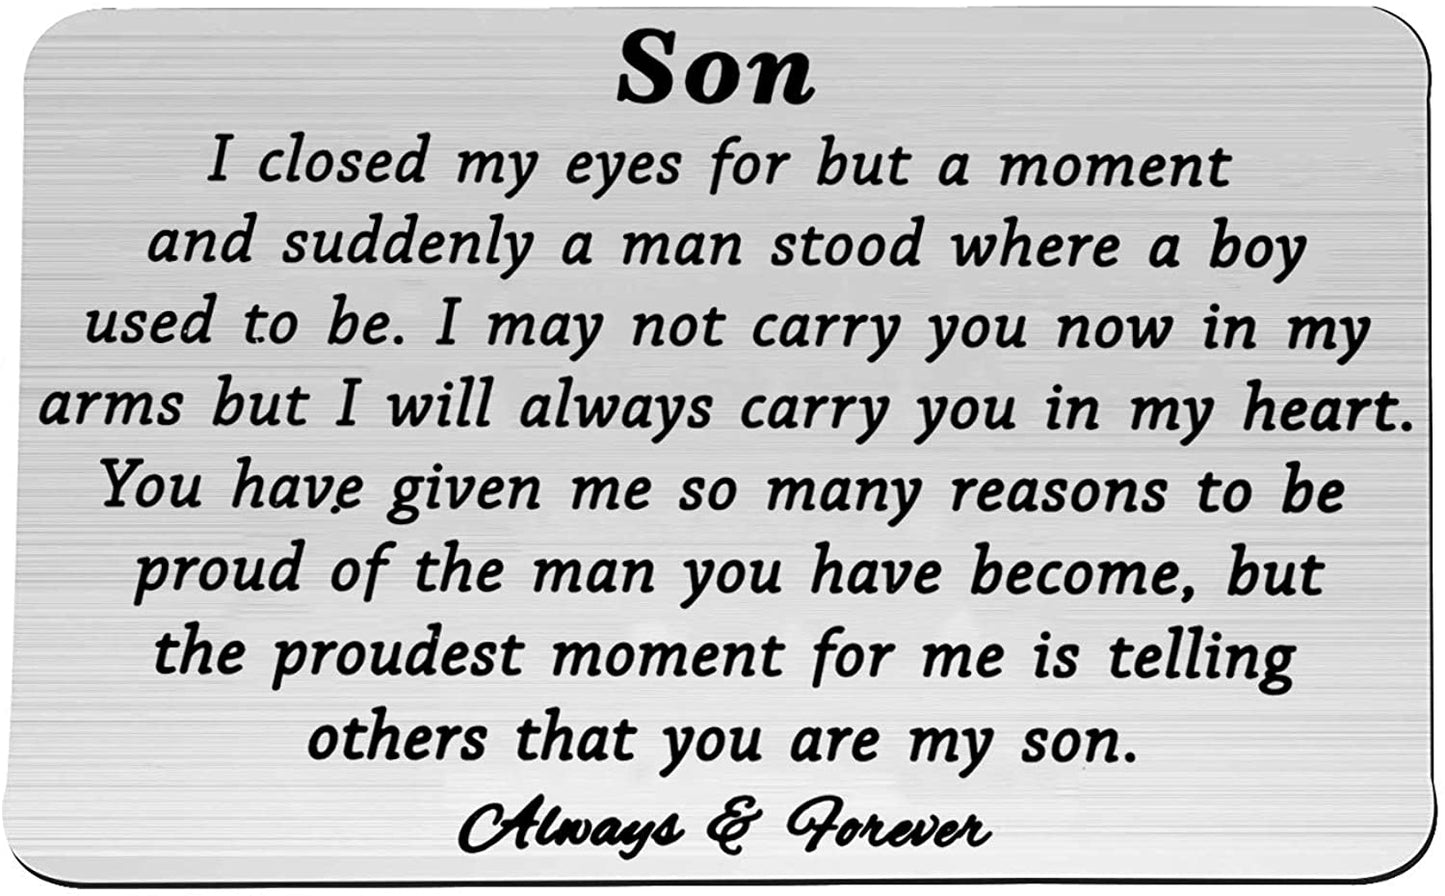 Wallet Card Proud of You Gifts I Closed My Eyes for A Moment Engraved Wallet Card for Son for Men